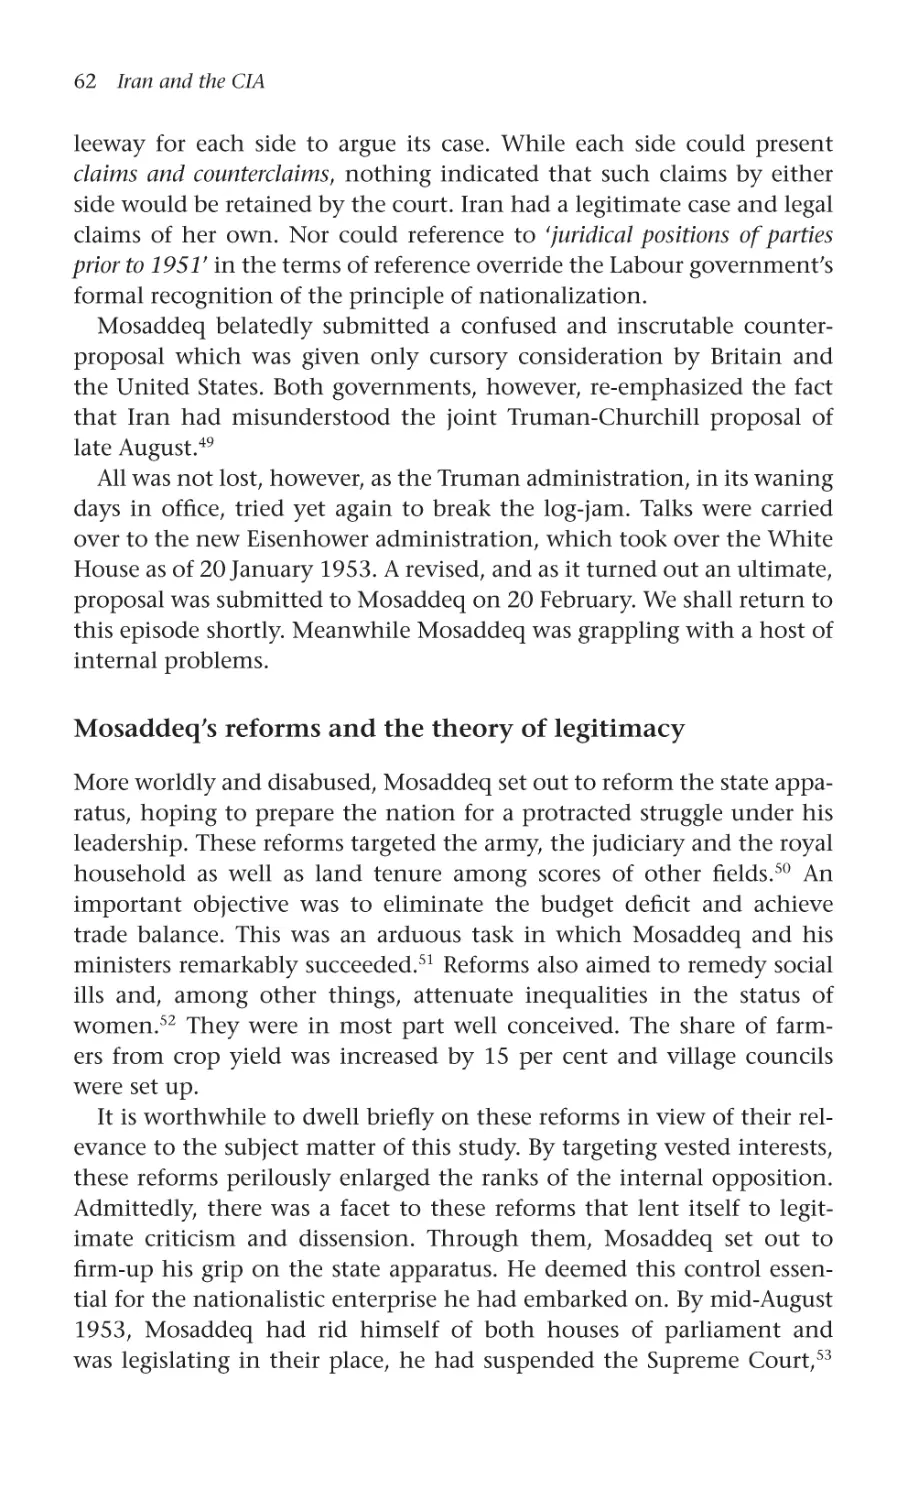 Mosaddeq's reforms and the theory of legitimacy